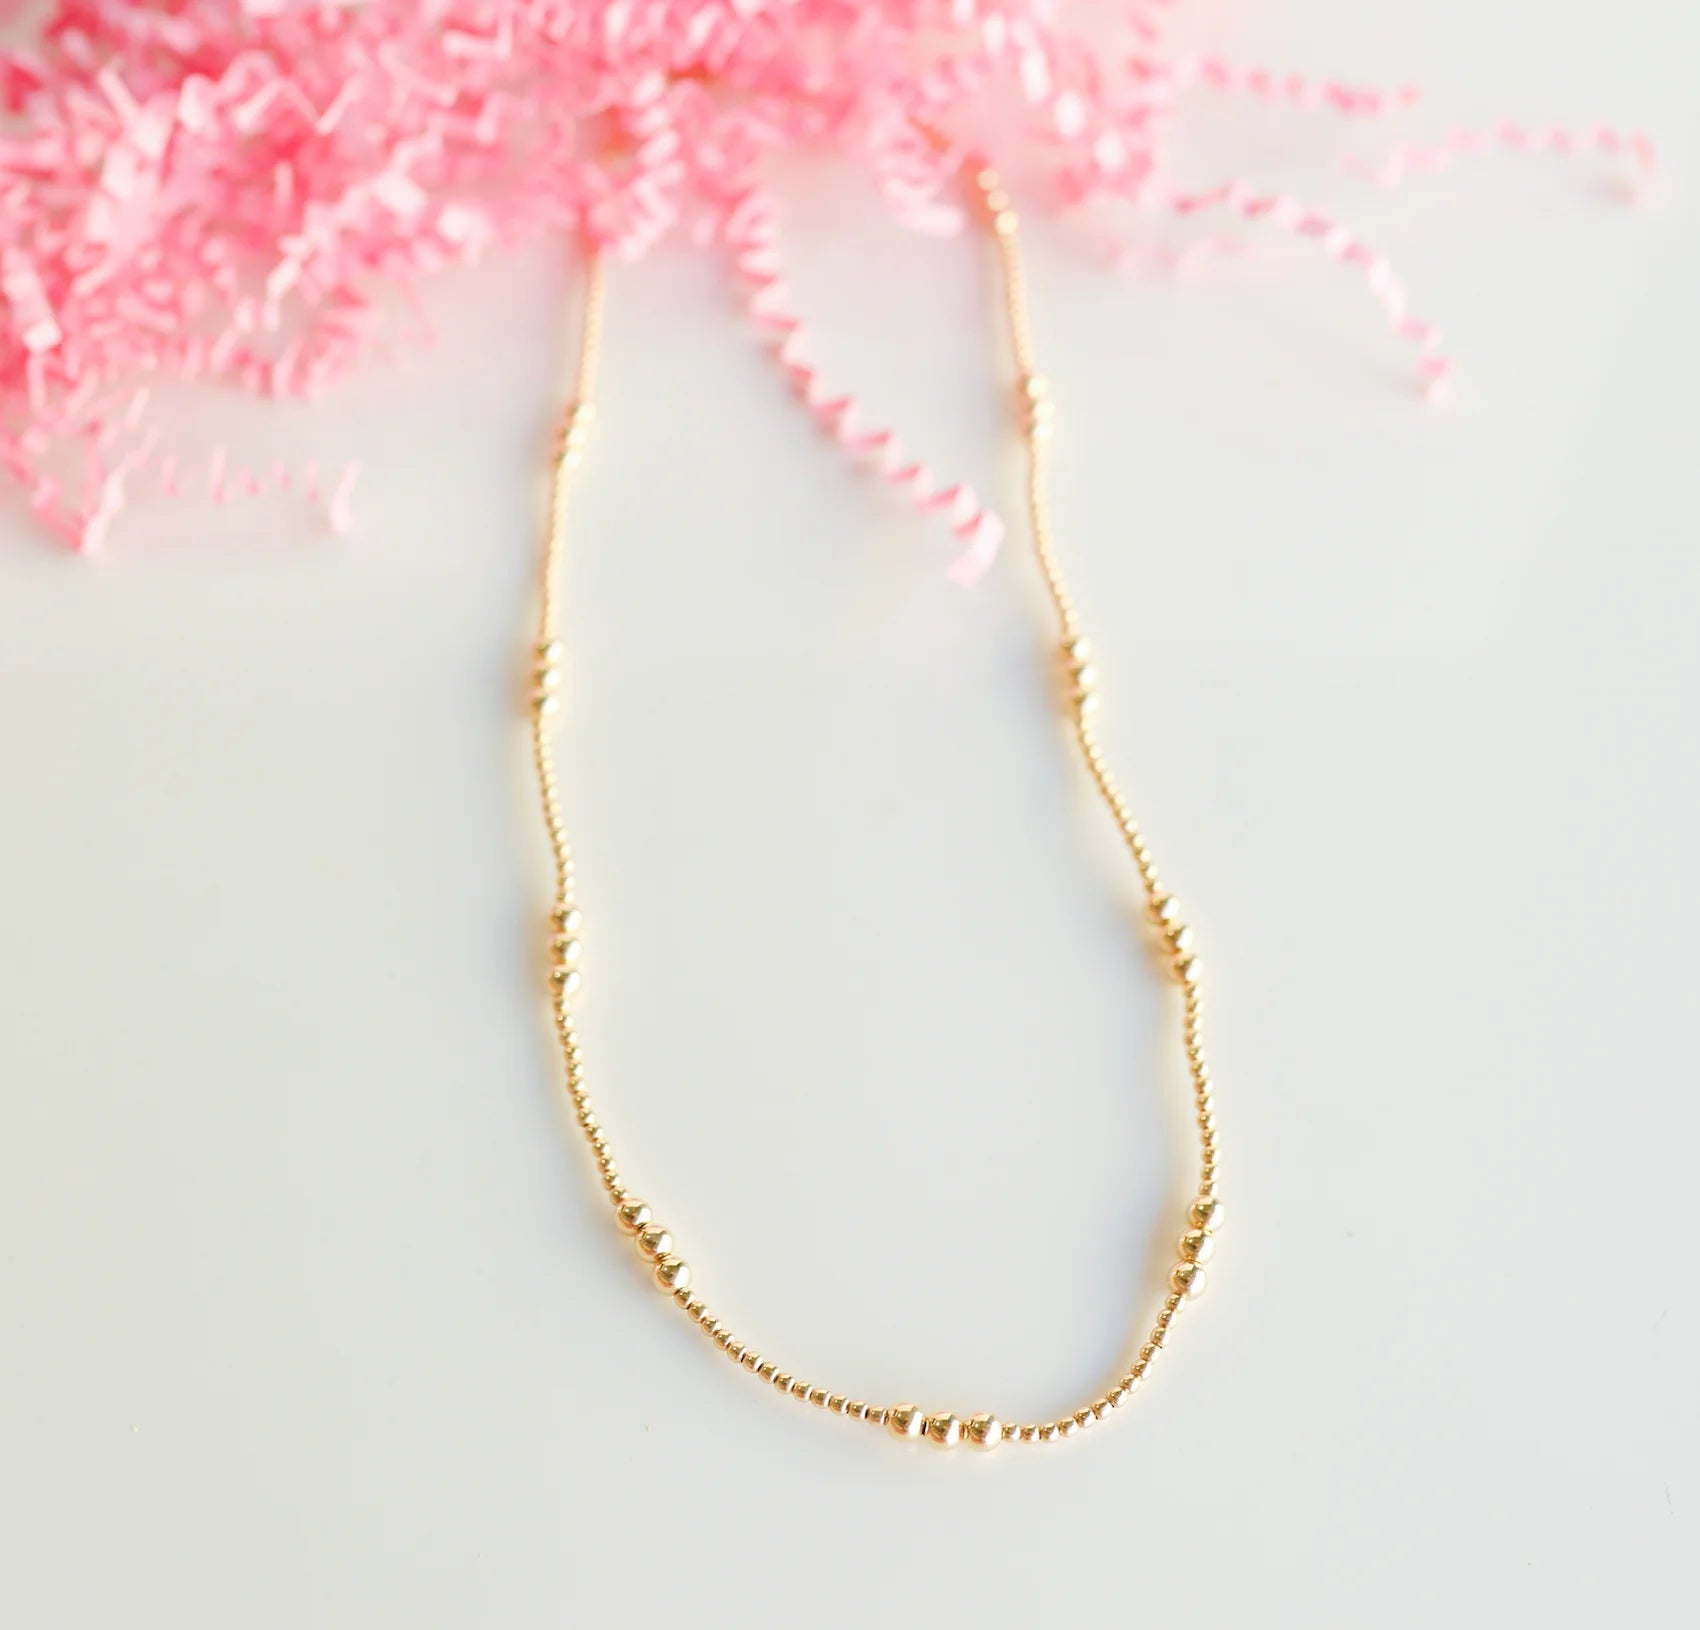 Beaded Blondes | ILY Gold Beaded Necklace - Giddy Up Glamour Boutique